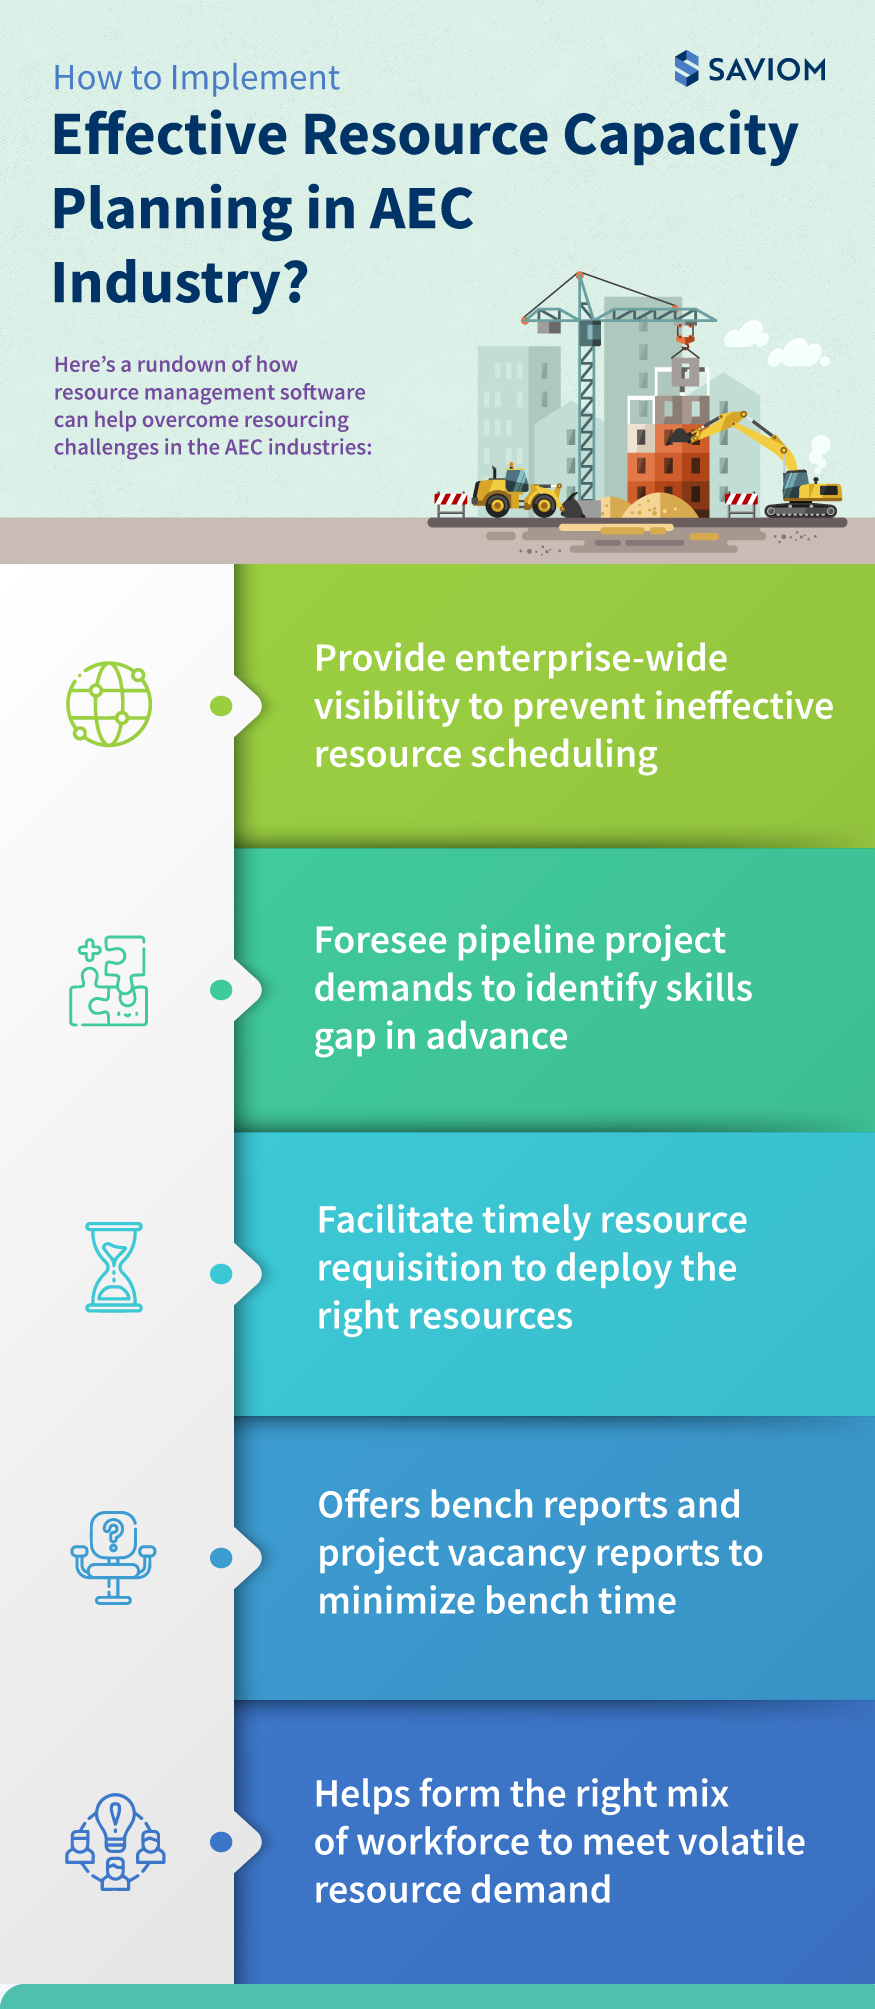 How to Implement Effective Resource Capacity Planning in AEC Industry? 